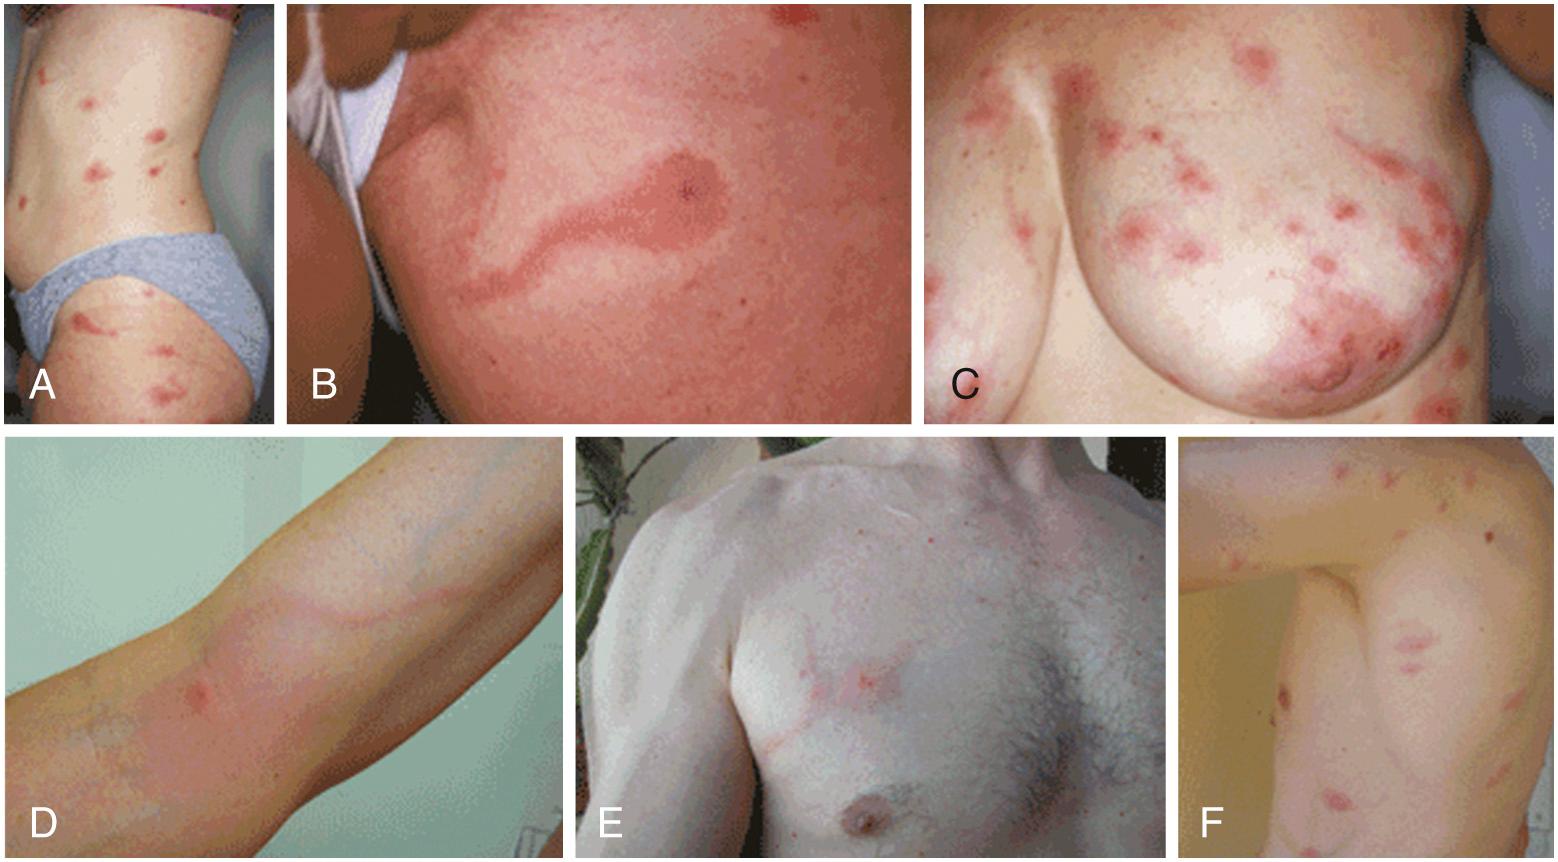 FIG. 295.6, (A–F) Photographs of six persons with skin lesions of Pyemotes ventricosus dermatitis.